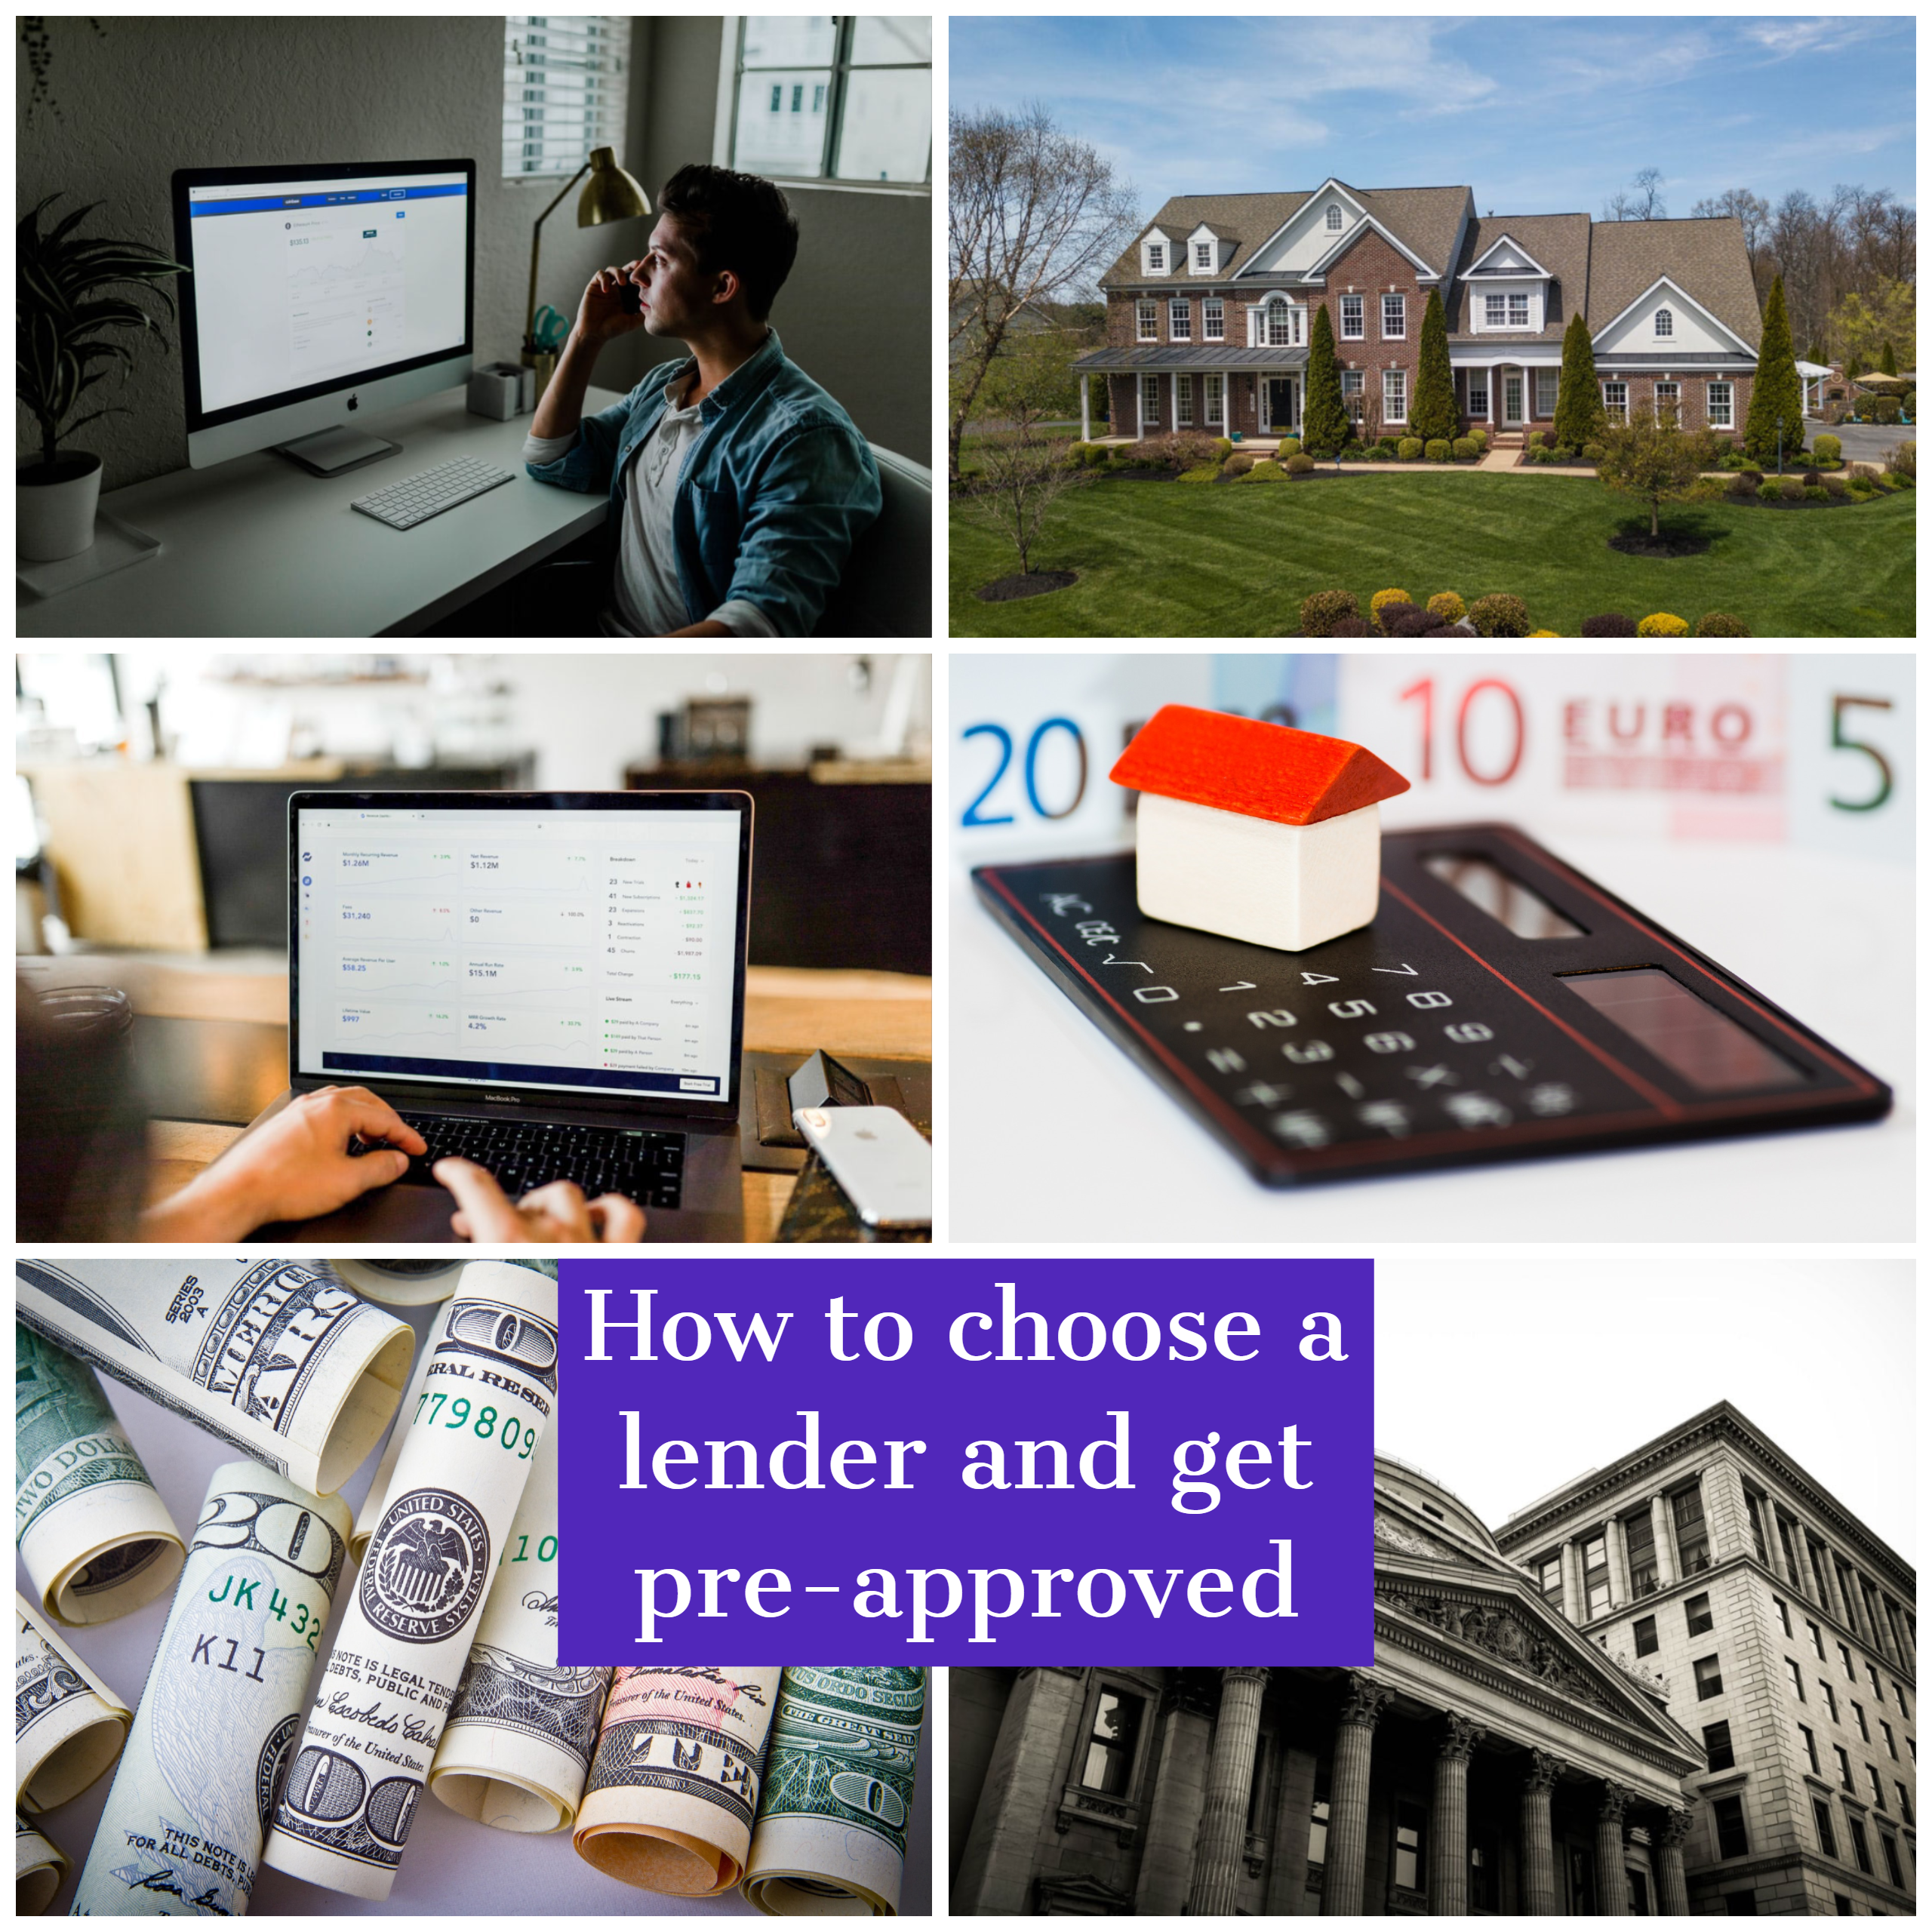 How to choose a lender and get pre